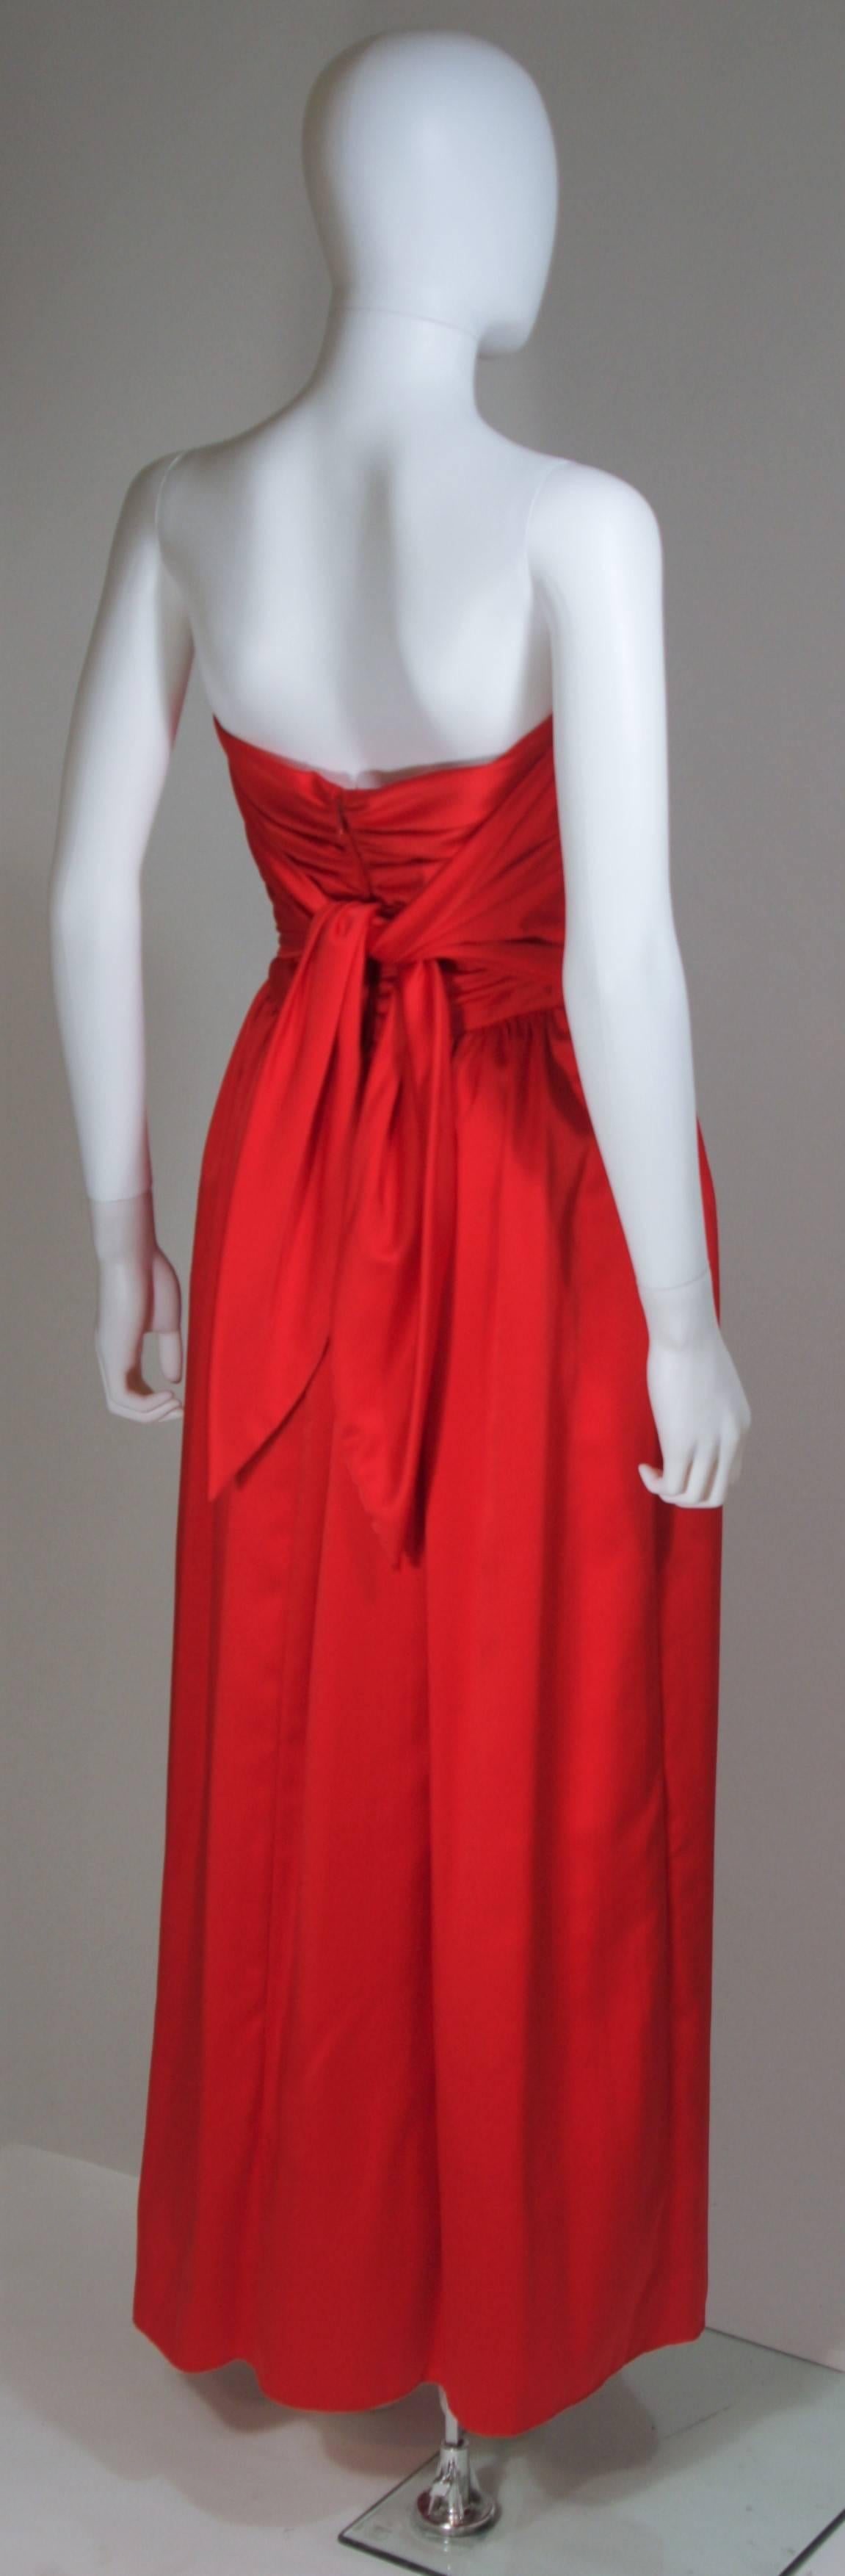 ANTHONY MUTO Red Gown with Gathered Bodice and Waist Tie Size 4-6 For Sale 1